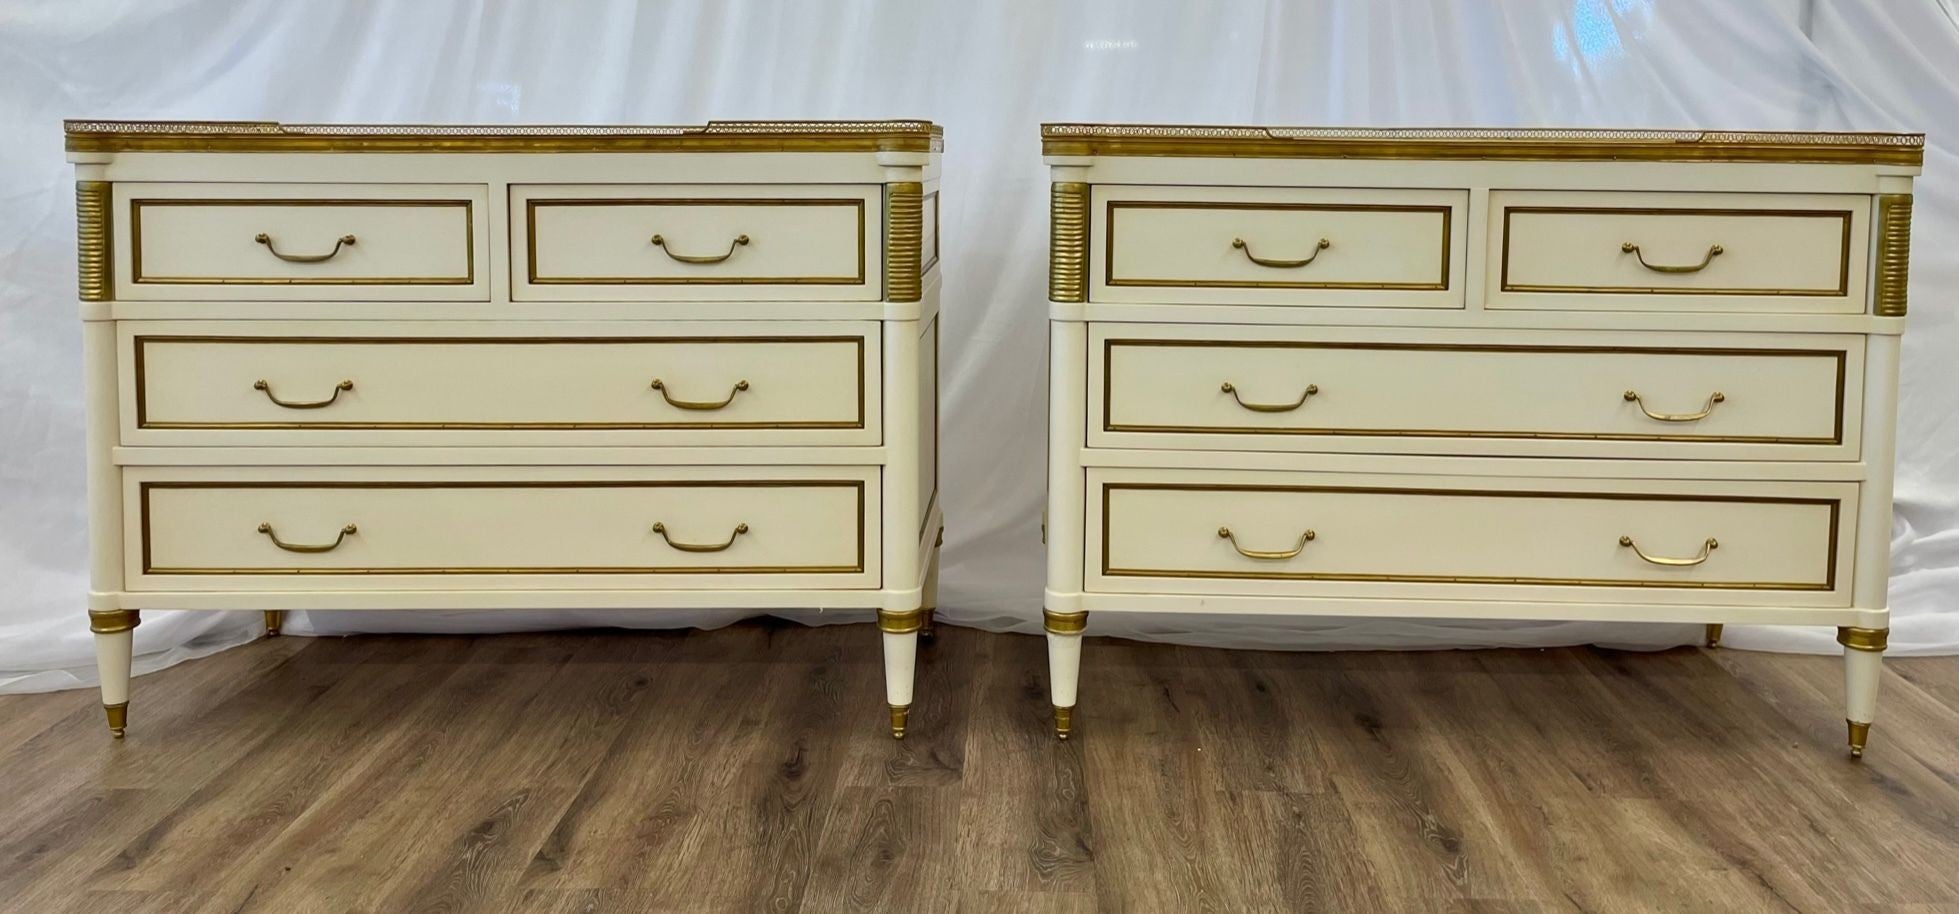 Pair of Cream Painted Louis XVI Style Commodes, Nightstands, Dressers, Chests